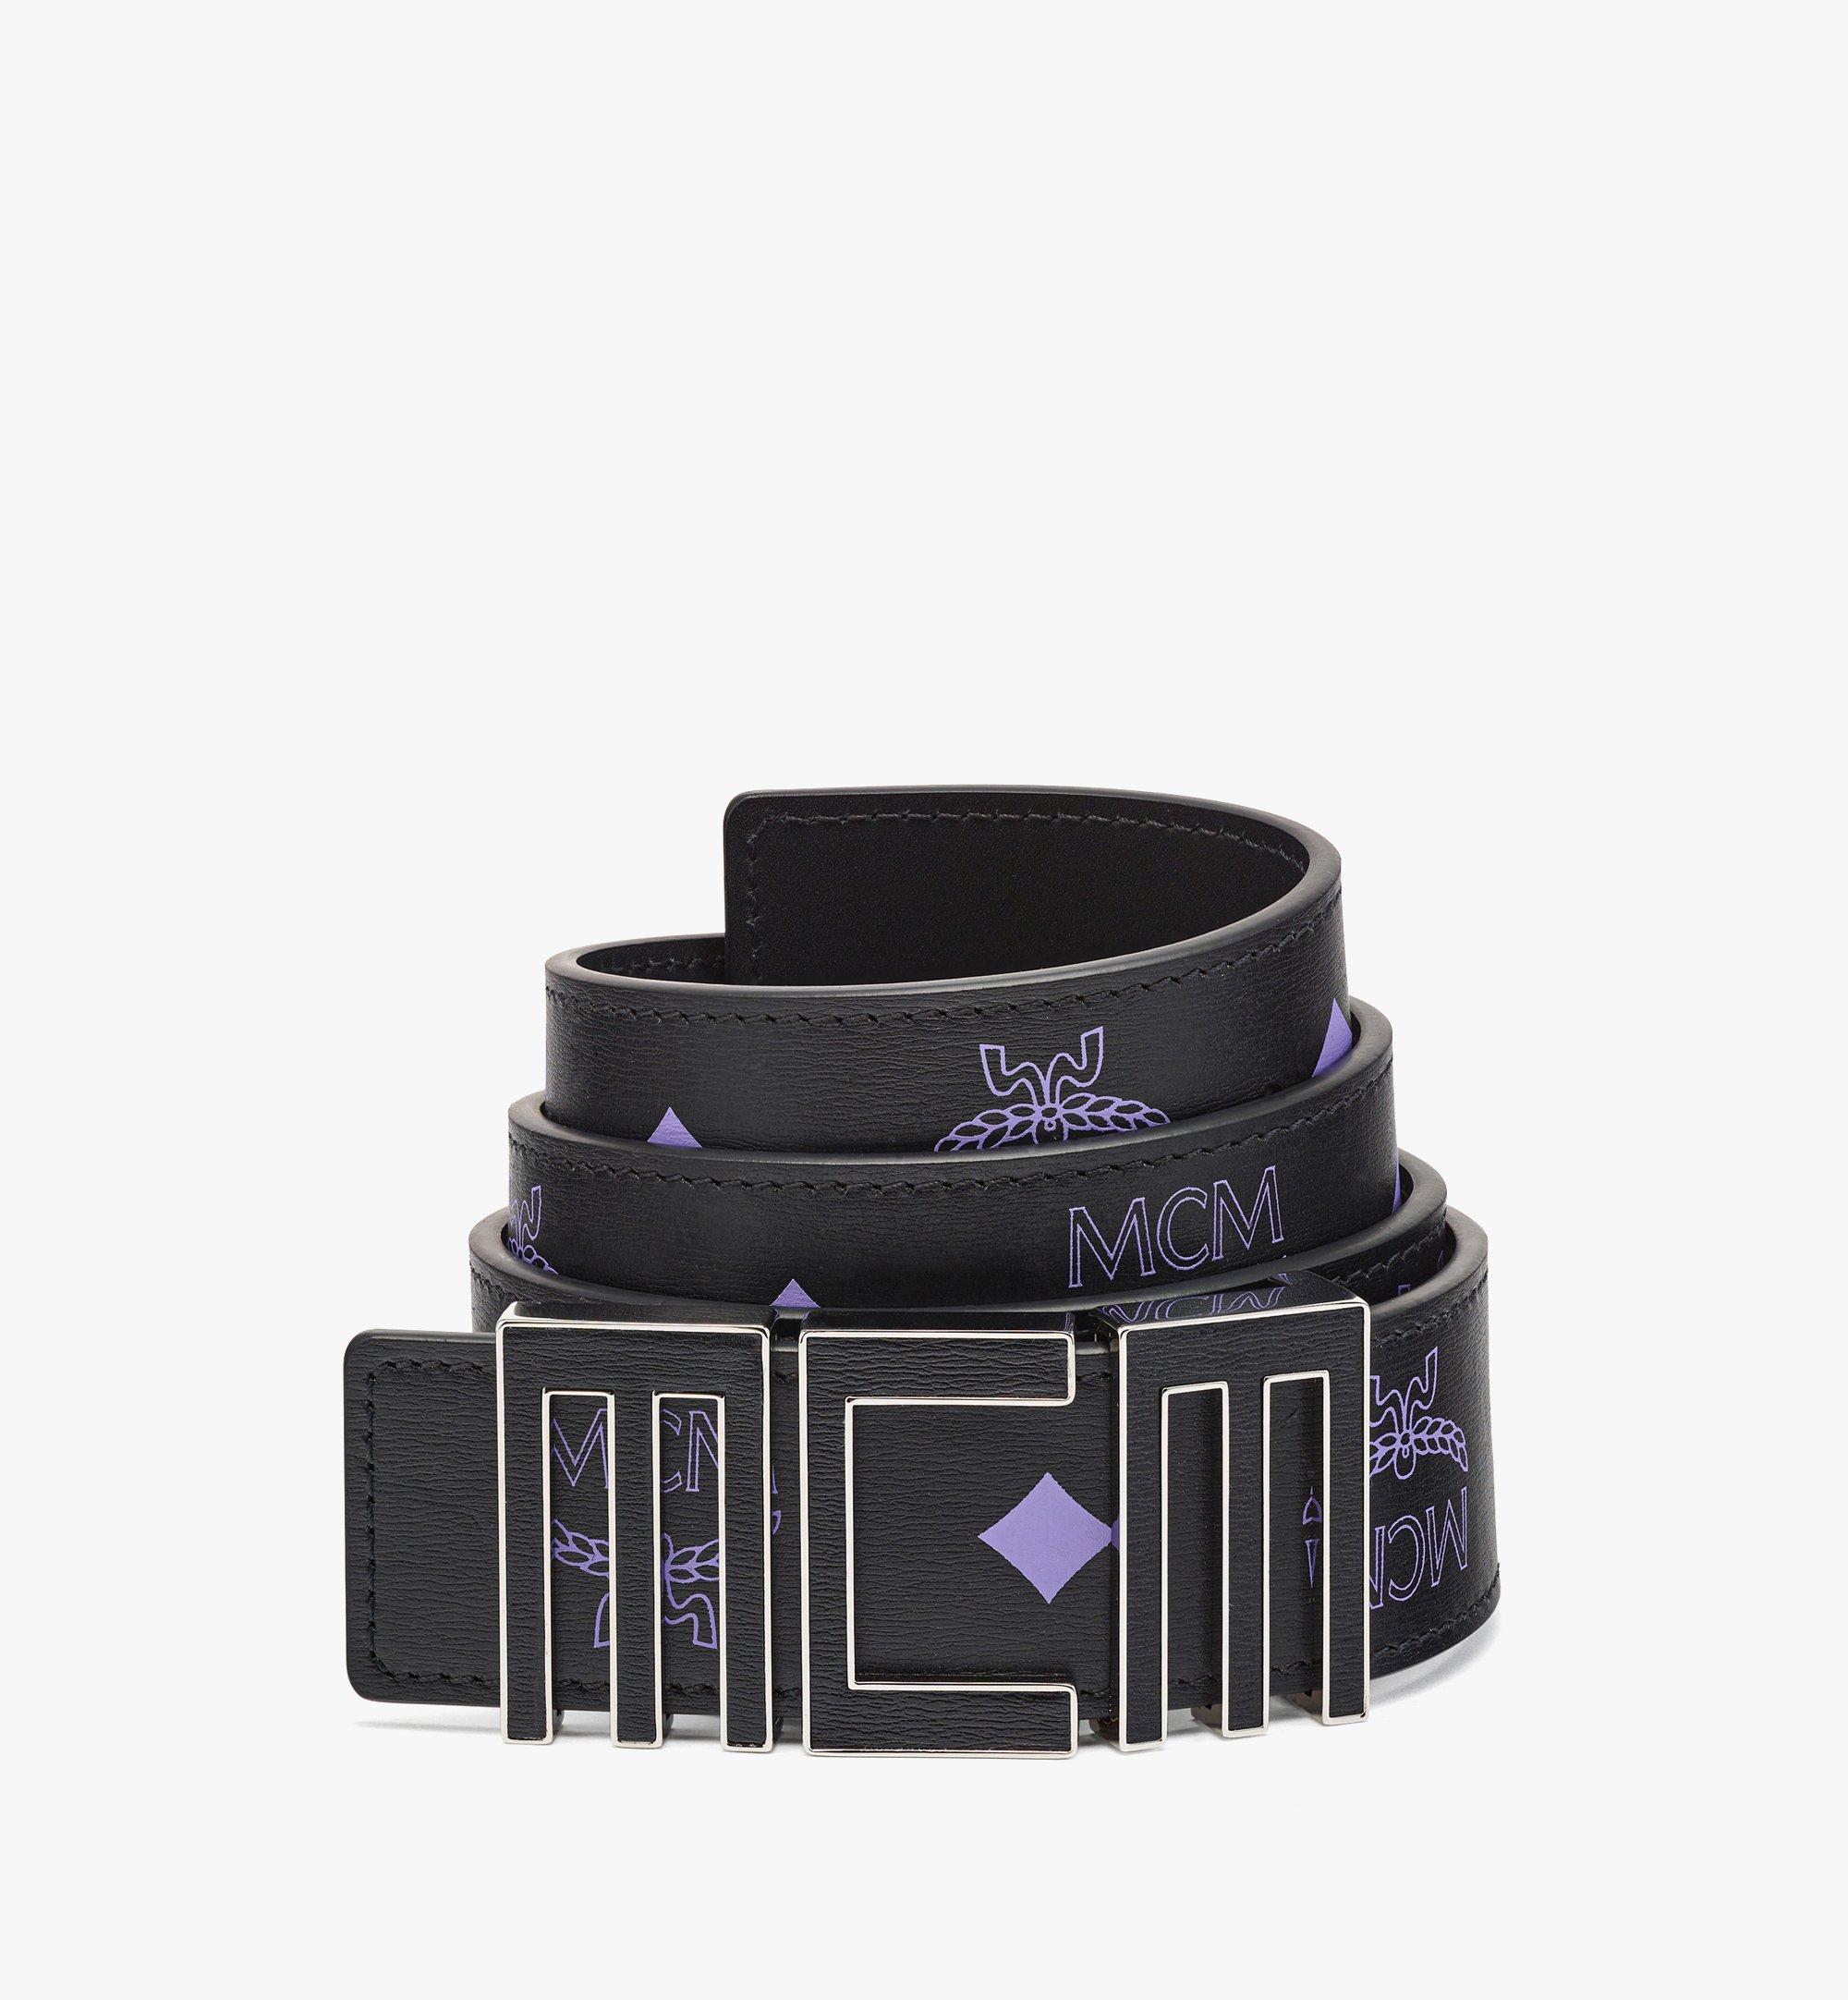 MCM Leather Inlay Tech MCM Reversible Belt 1.5” in Embossed Leather Purple MXBCSTC03U4100 Alternate View 1